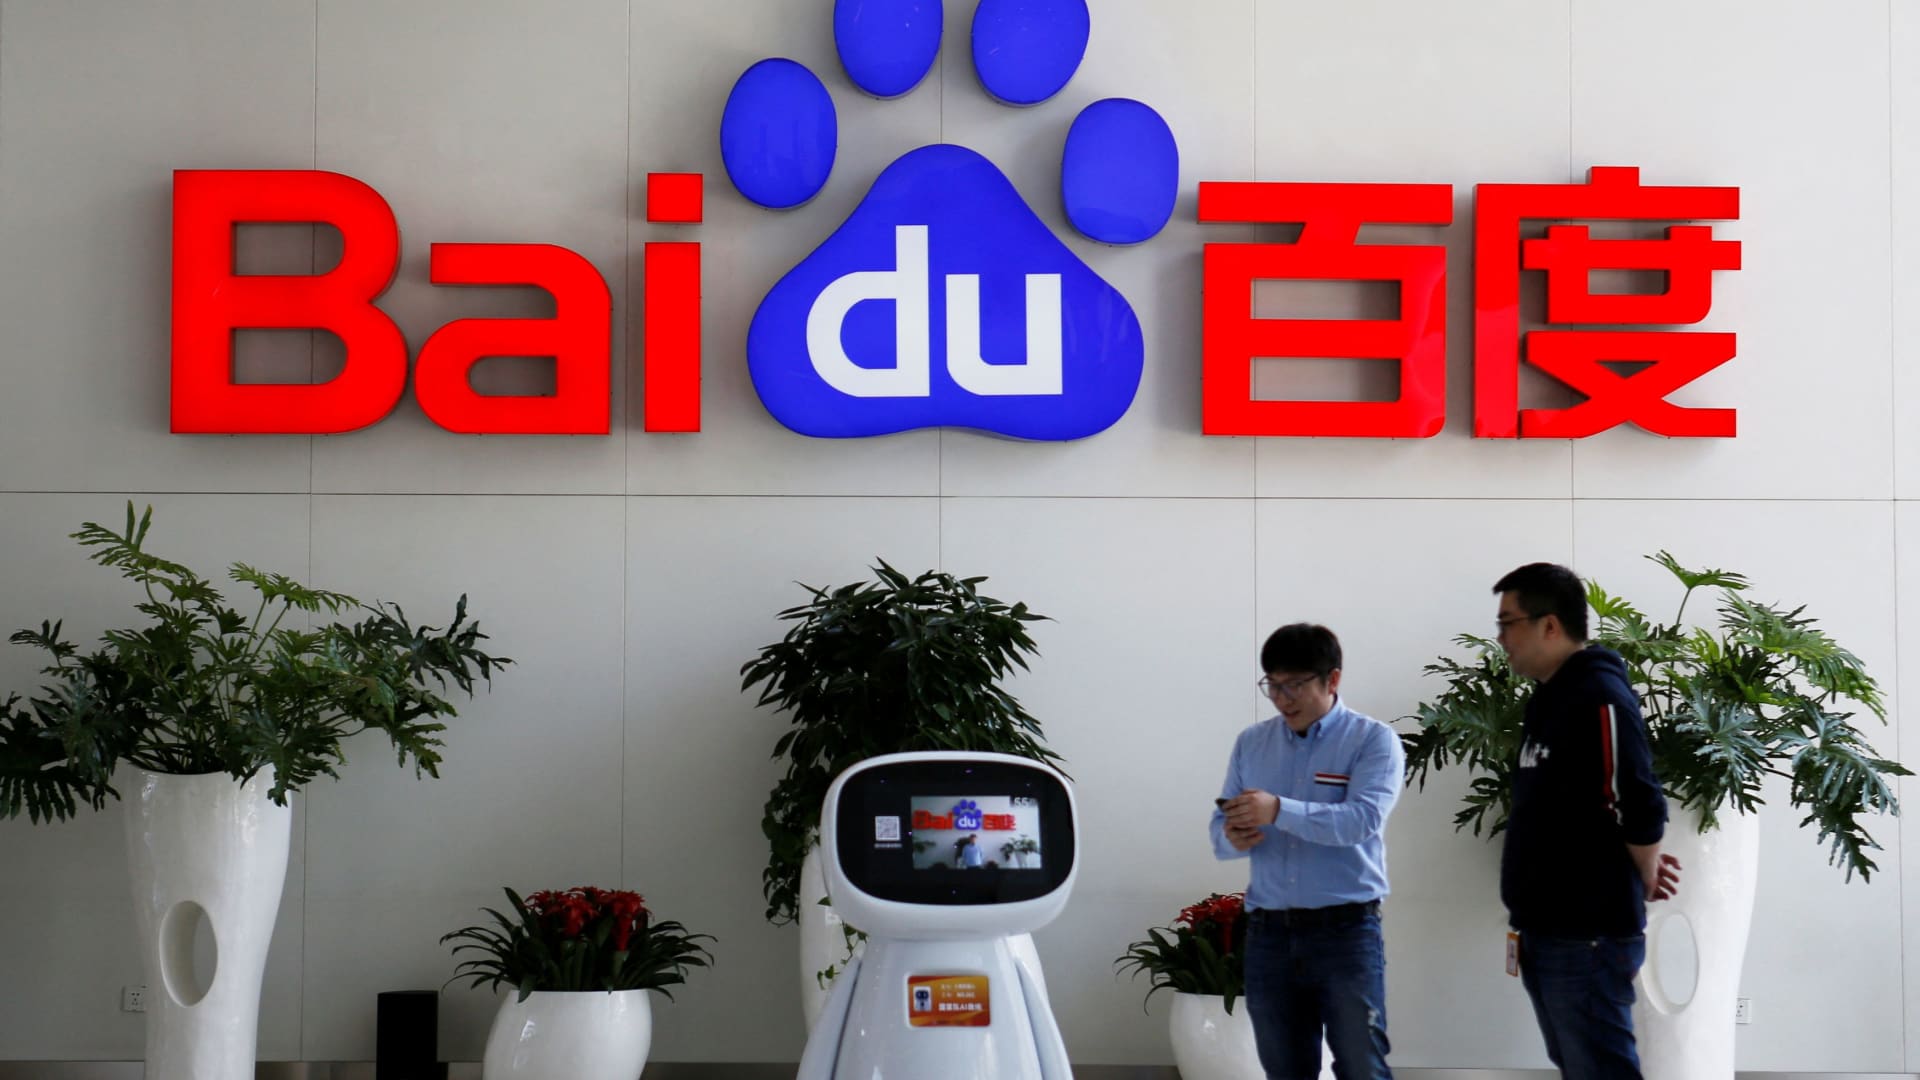 Baidu shares drop to 8-week lows after company reveals ChatGPT rival